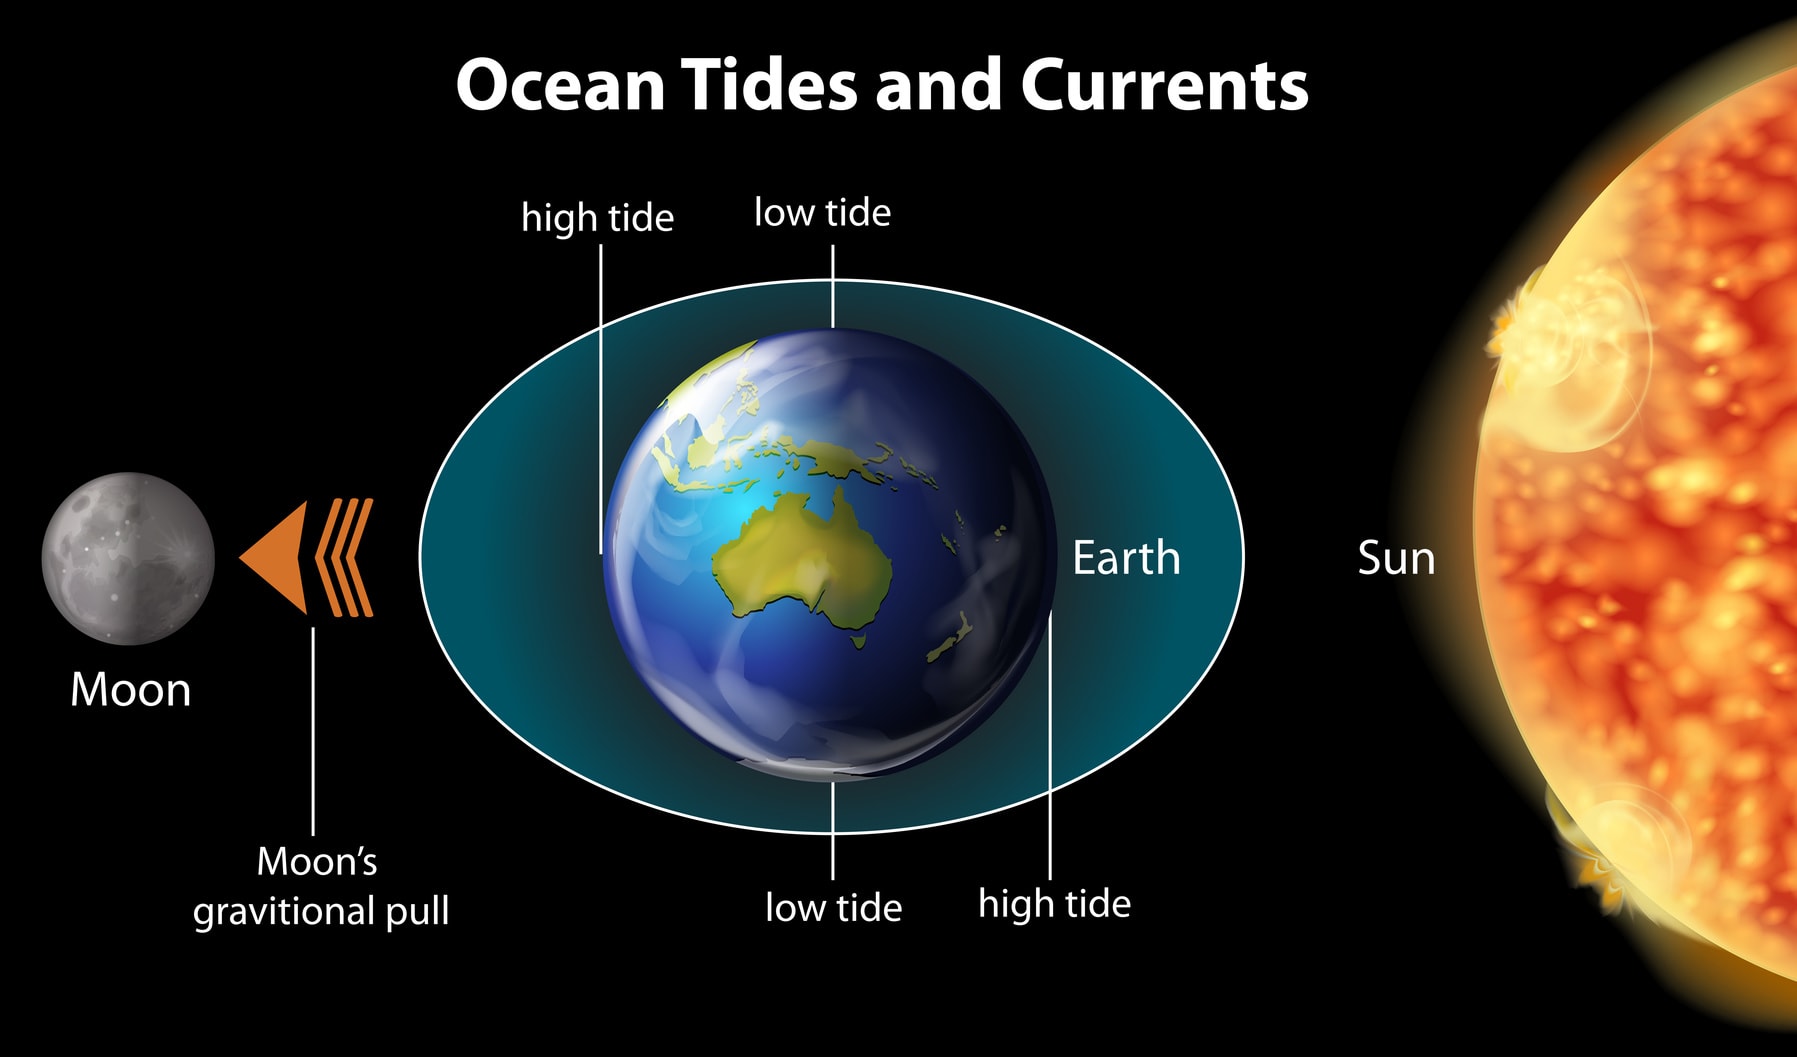 Image showing the Ocean Tides and Currents